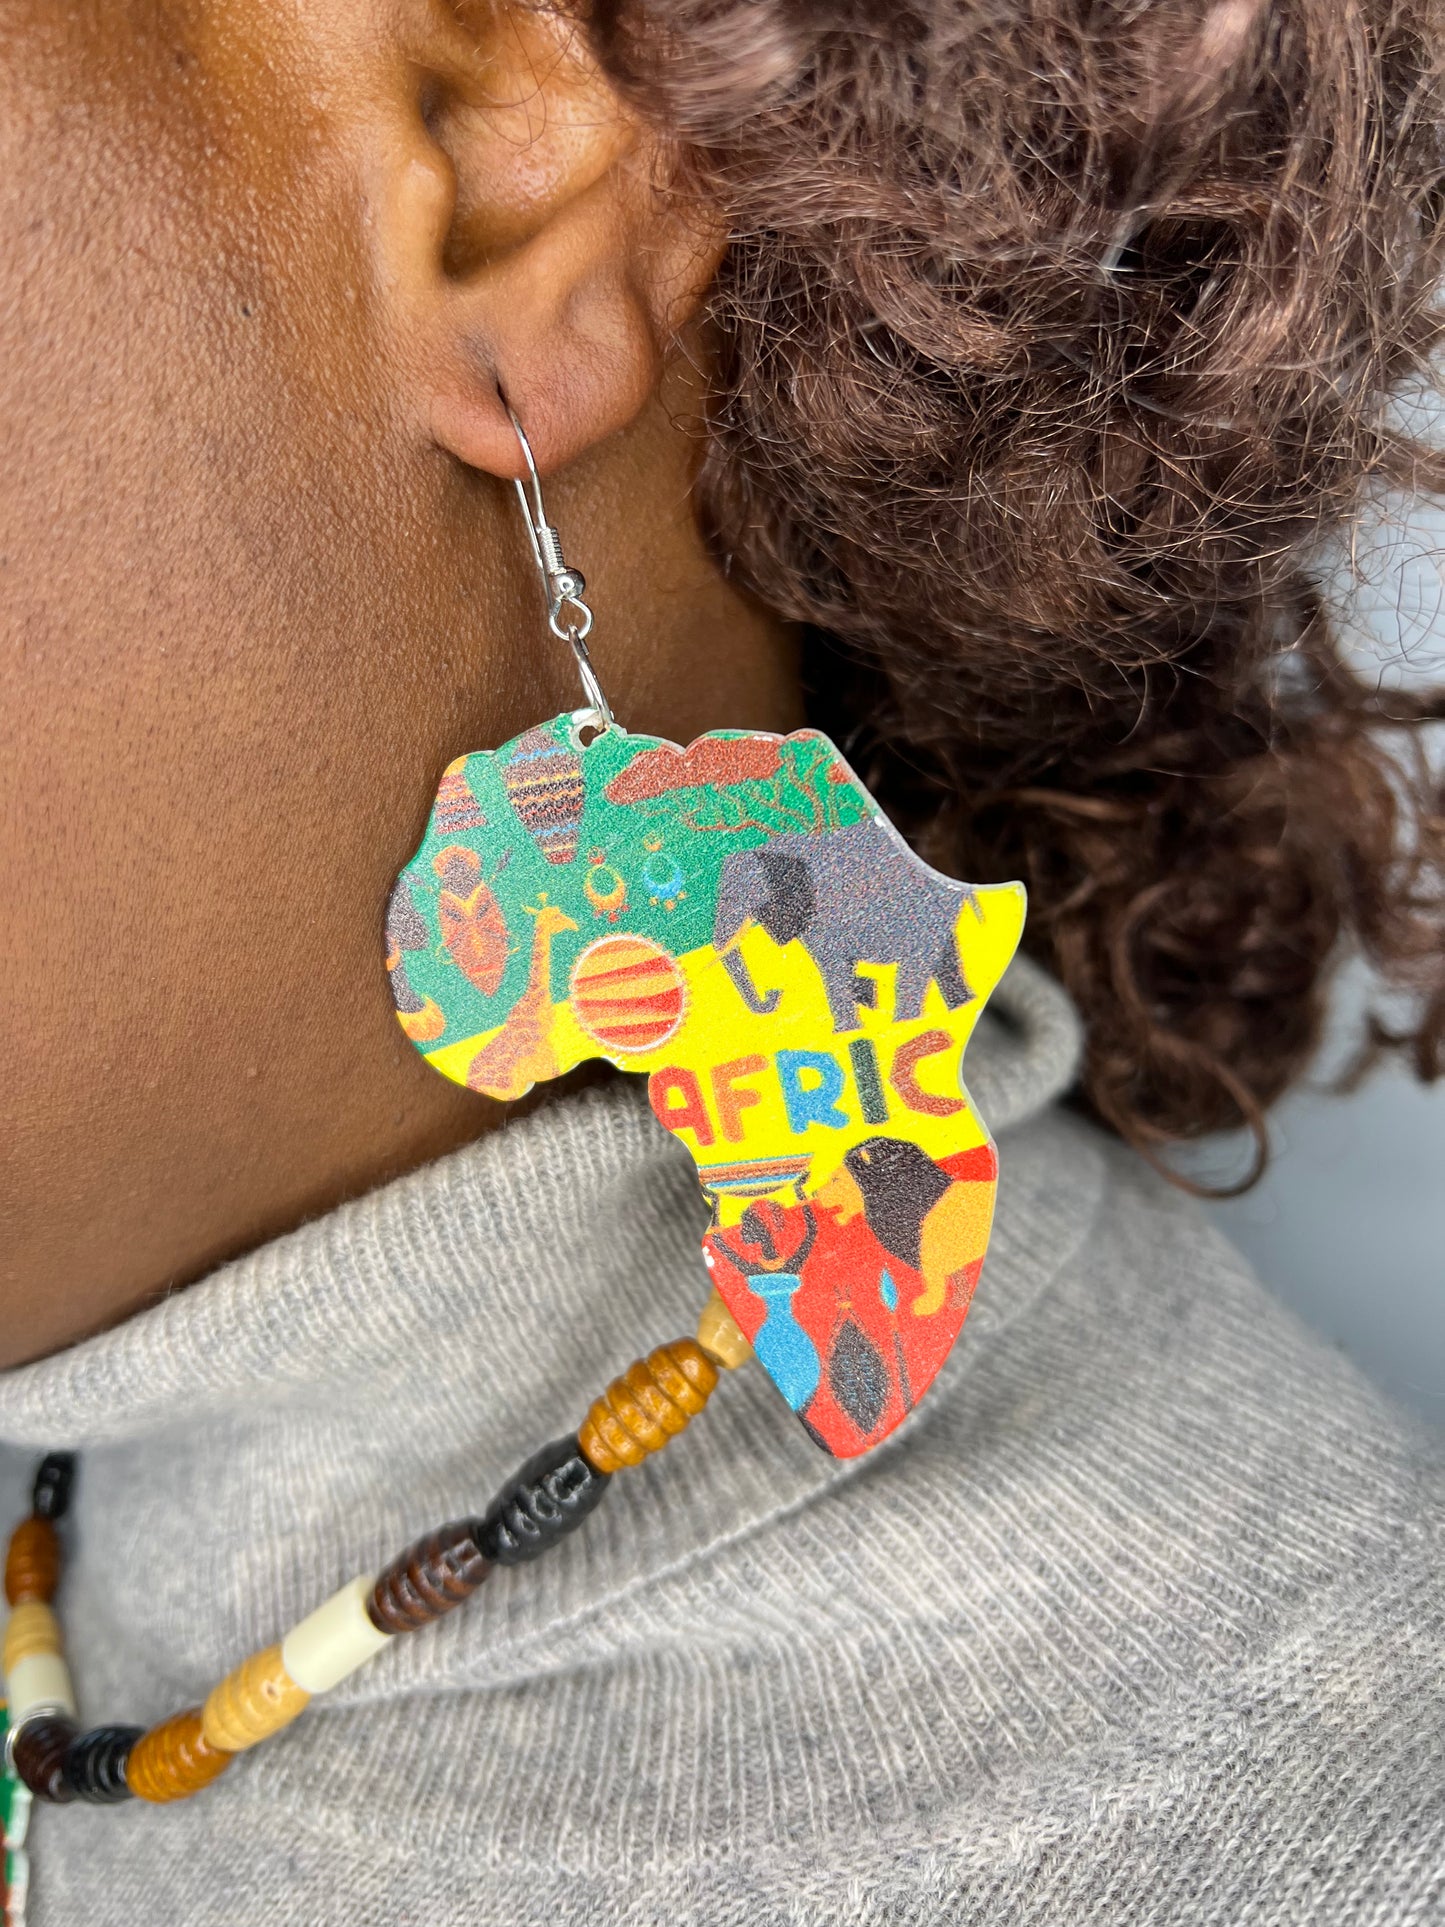 African Map jewelry